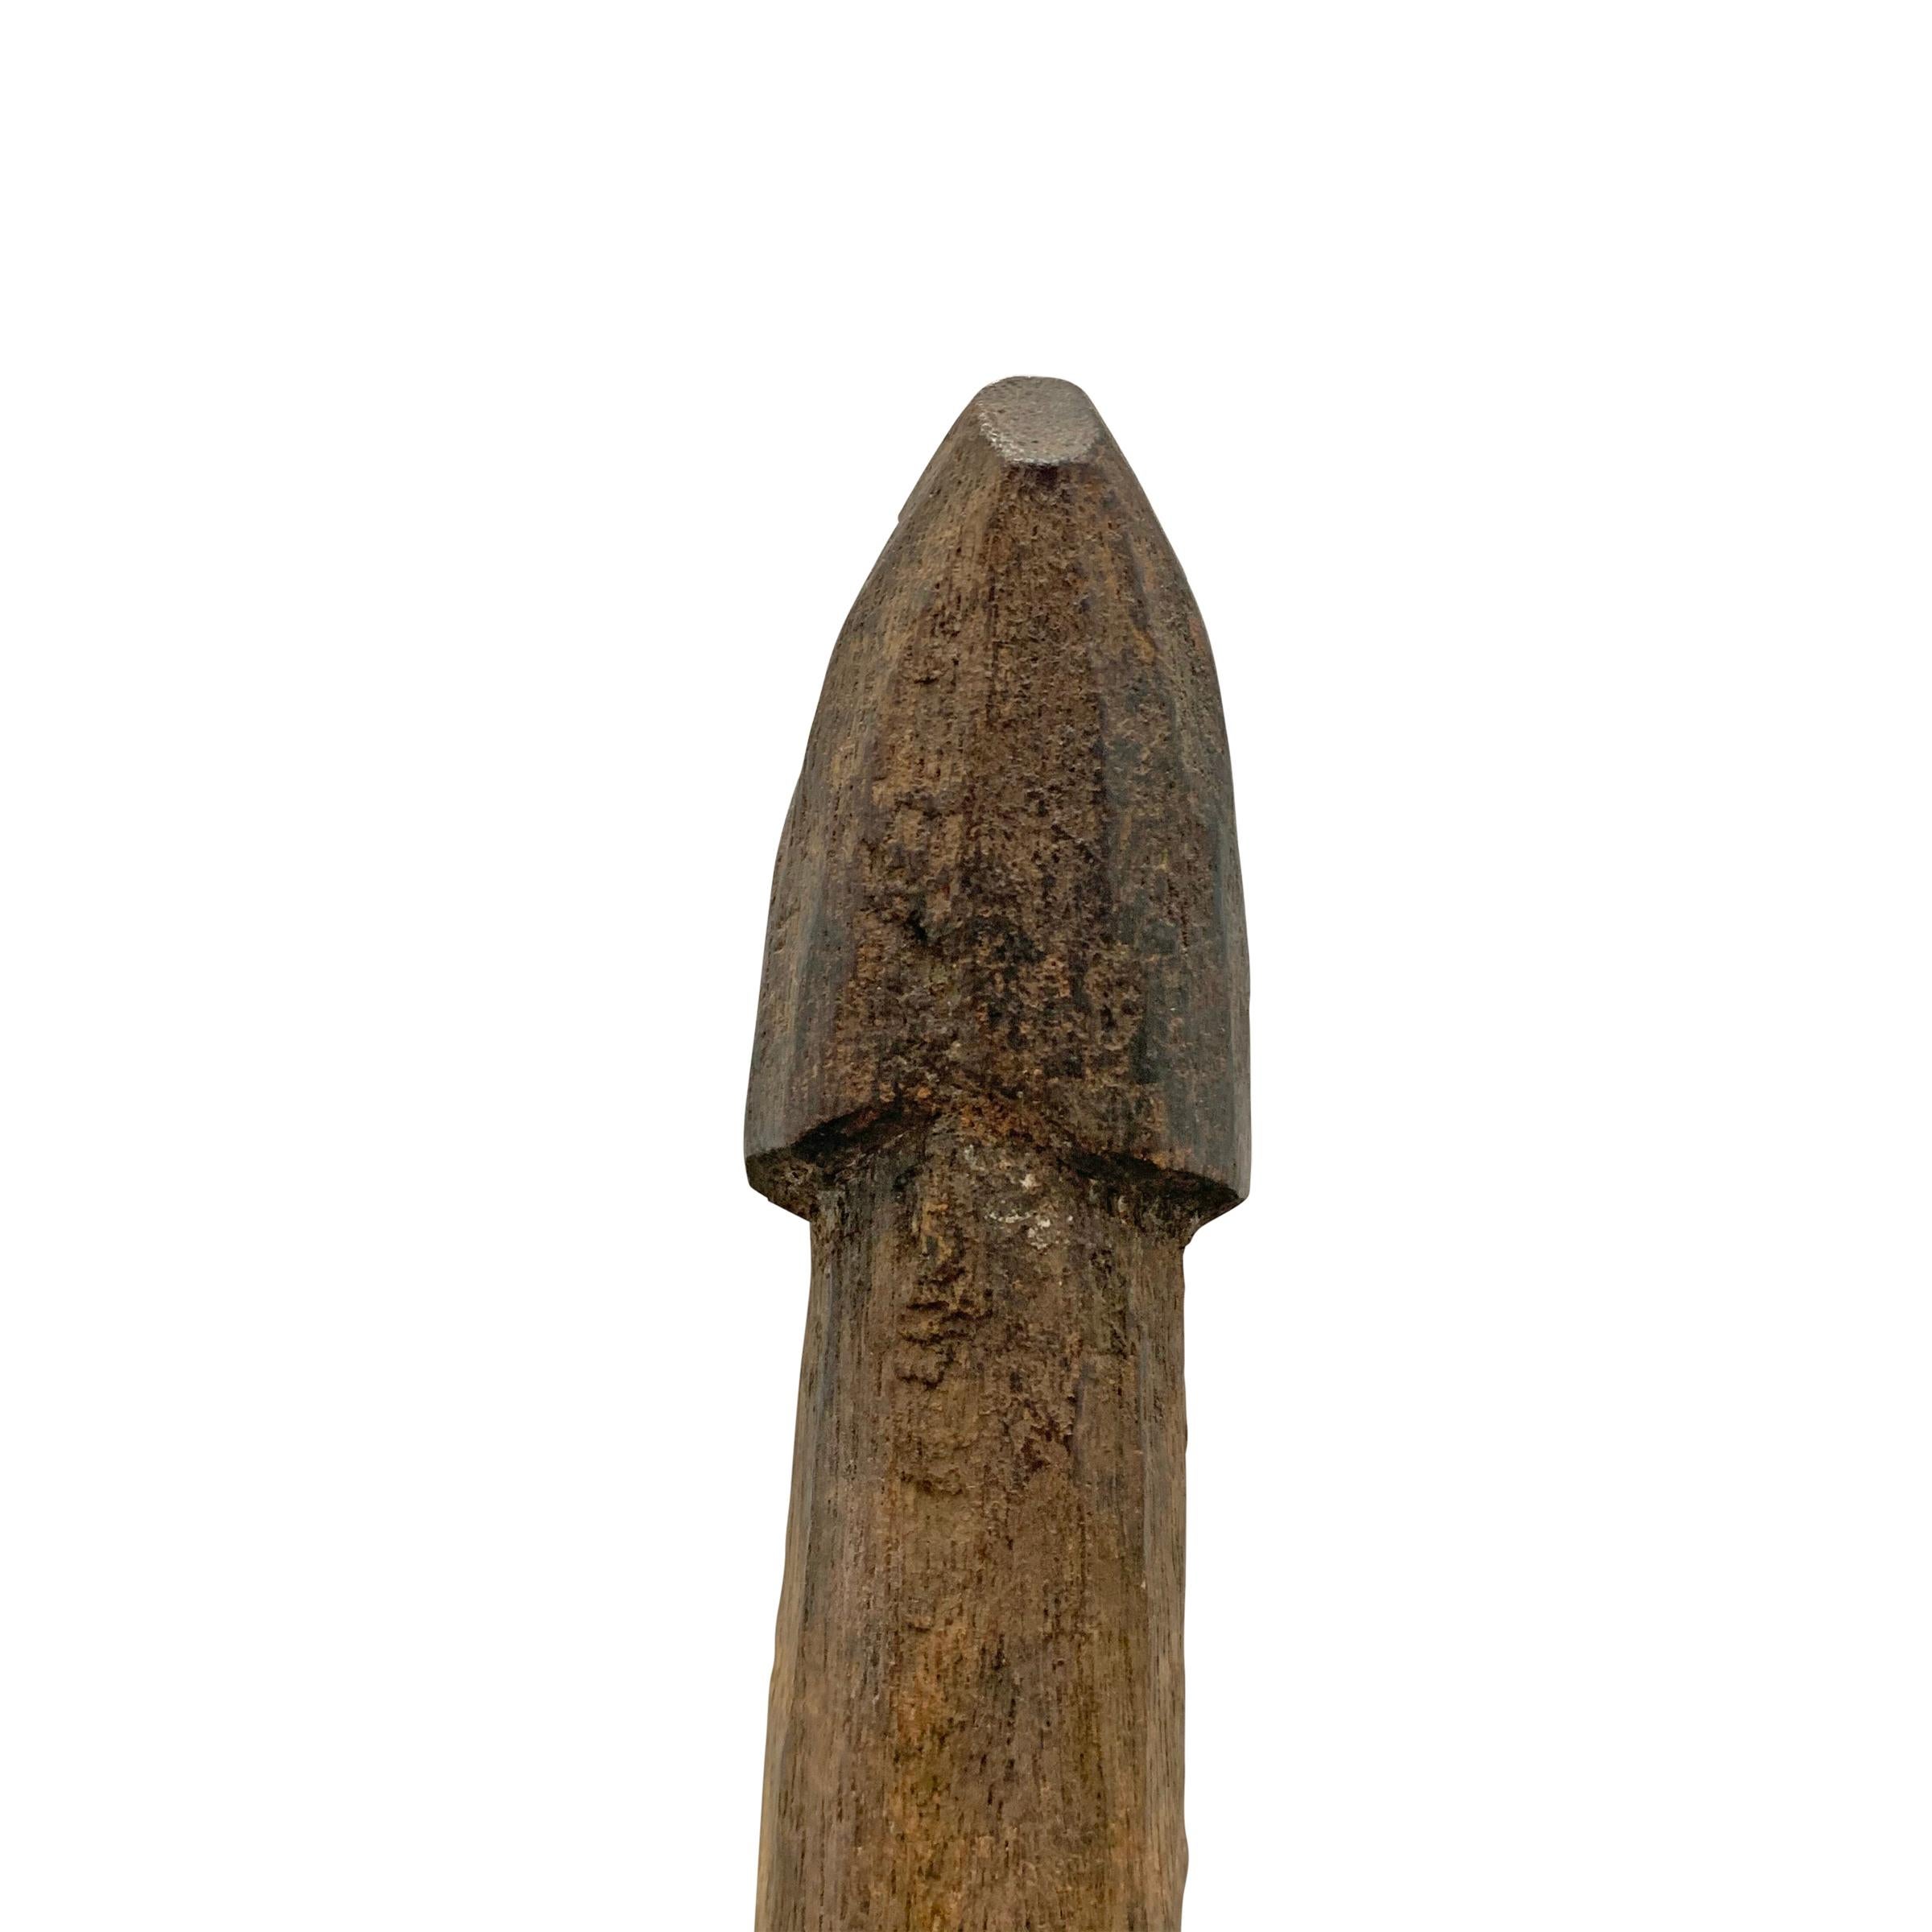 Hand-Carved Wooden Fertility Figure